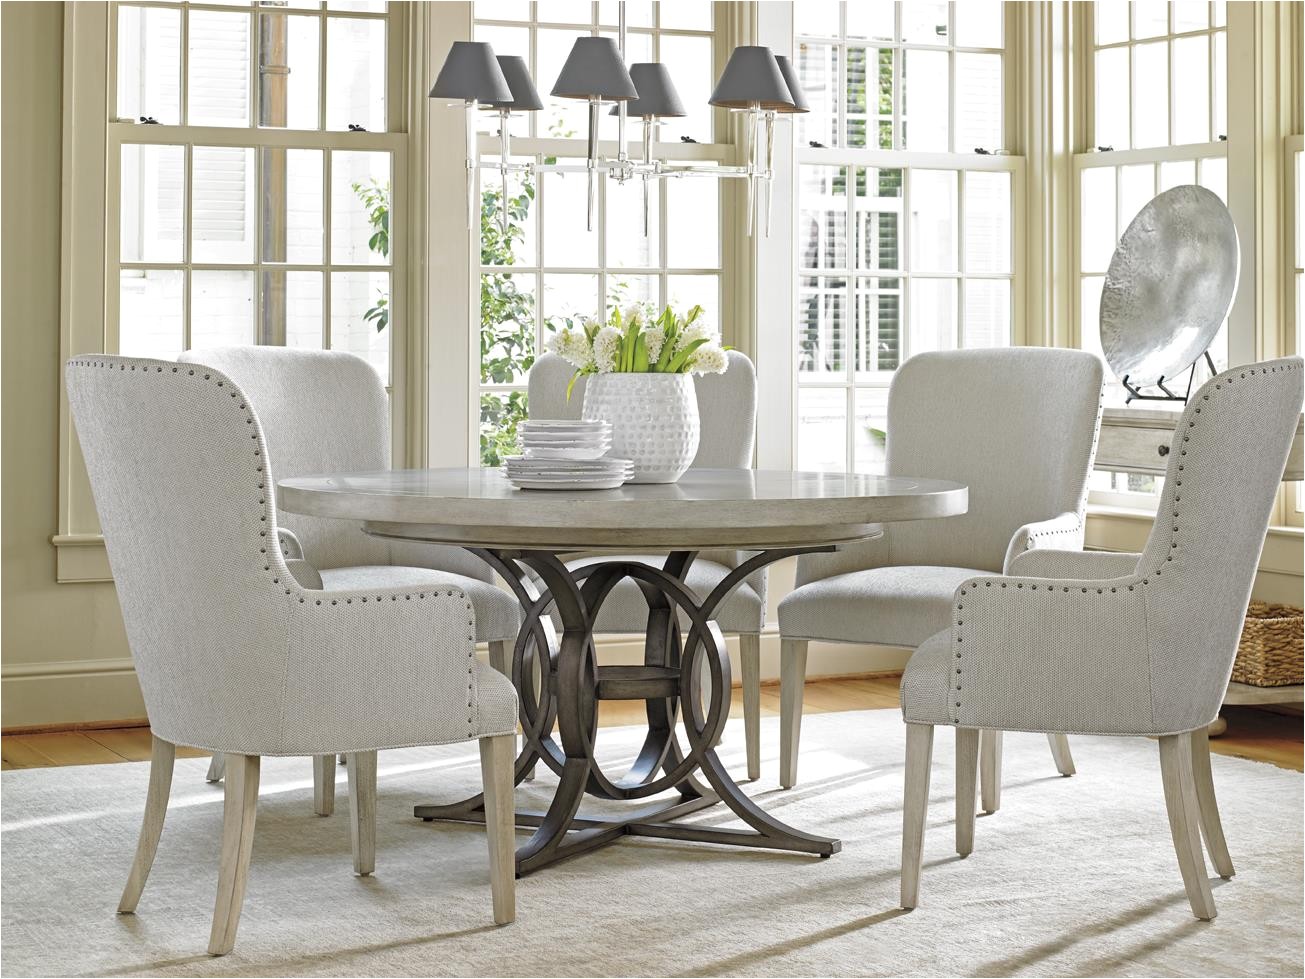 baers dining room sets